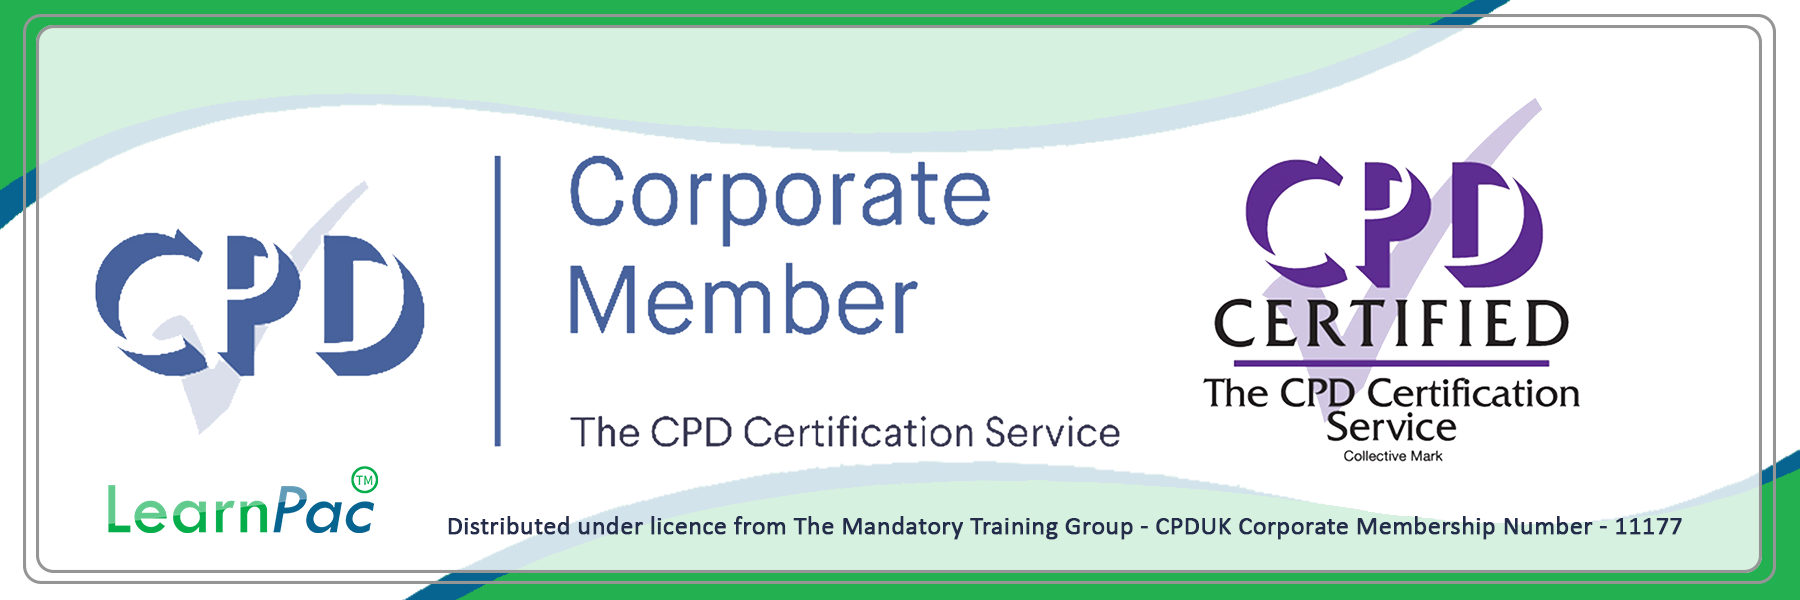 Data Security Awareness for Volunteers - Online Training Course - CPDUK Certified - Learnpac System UK - (2)